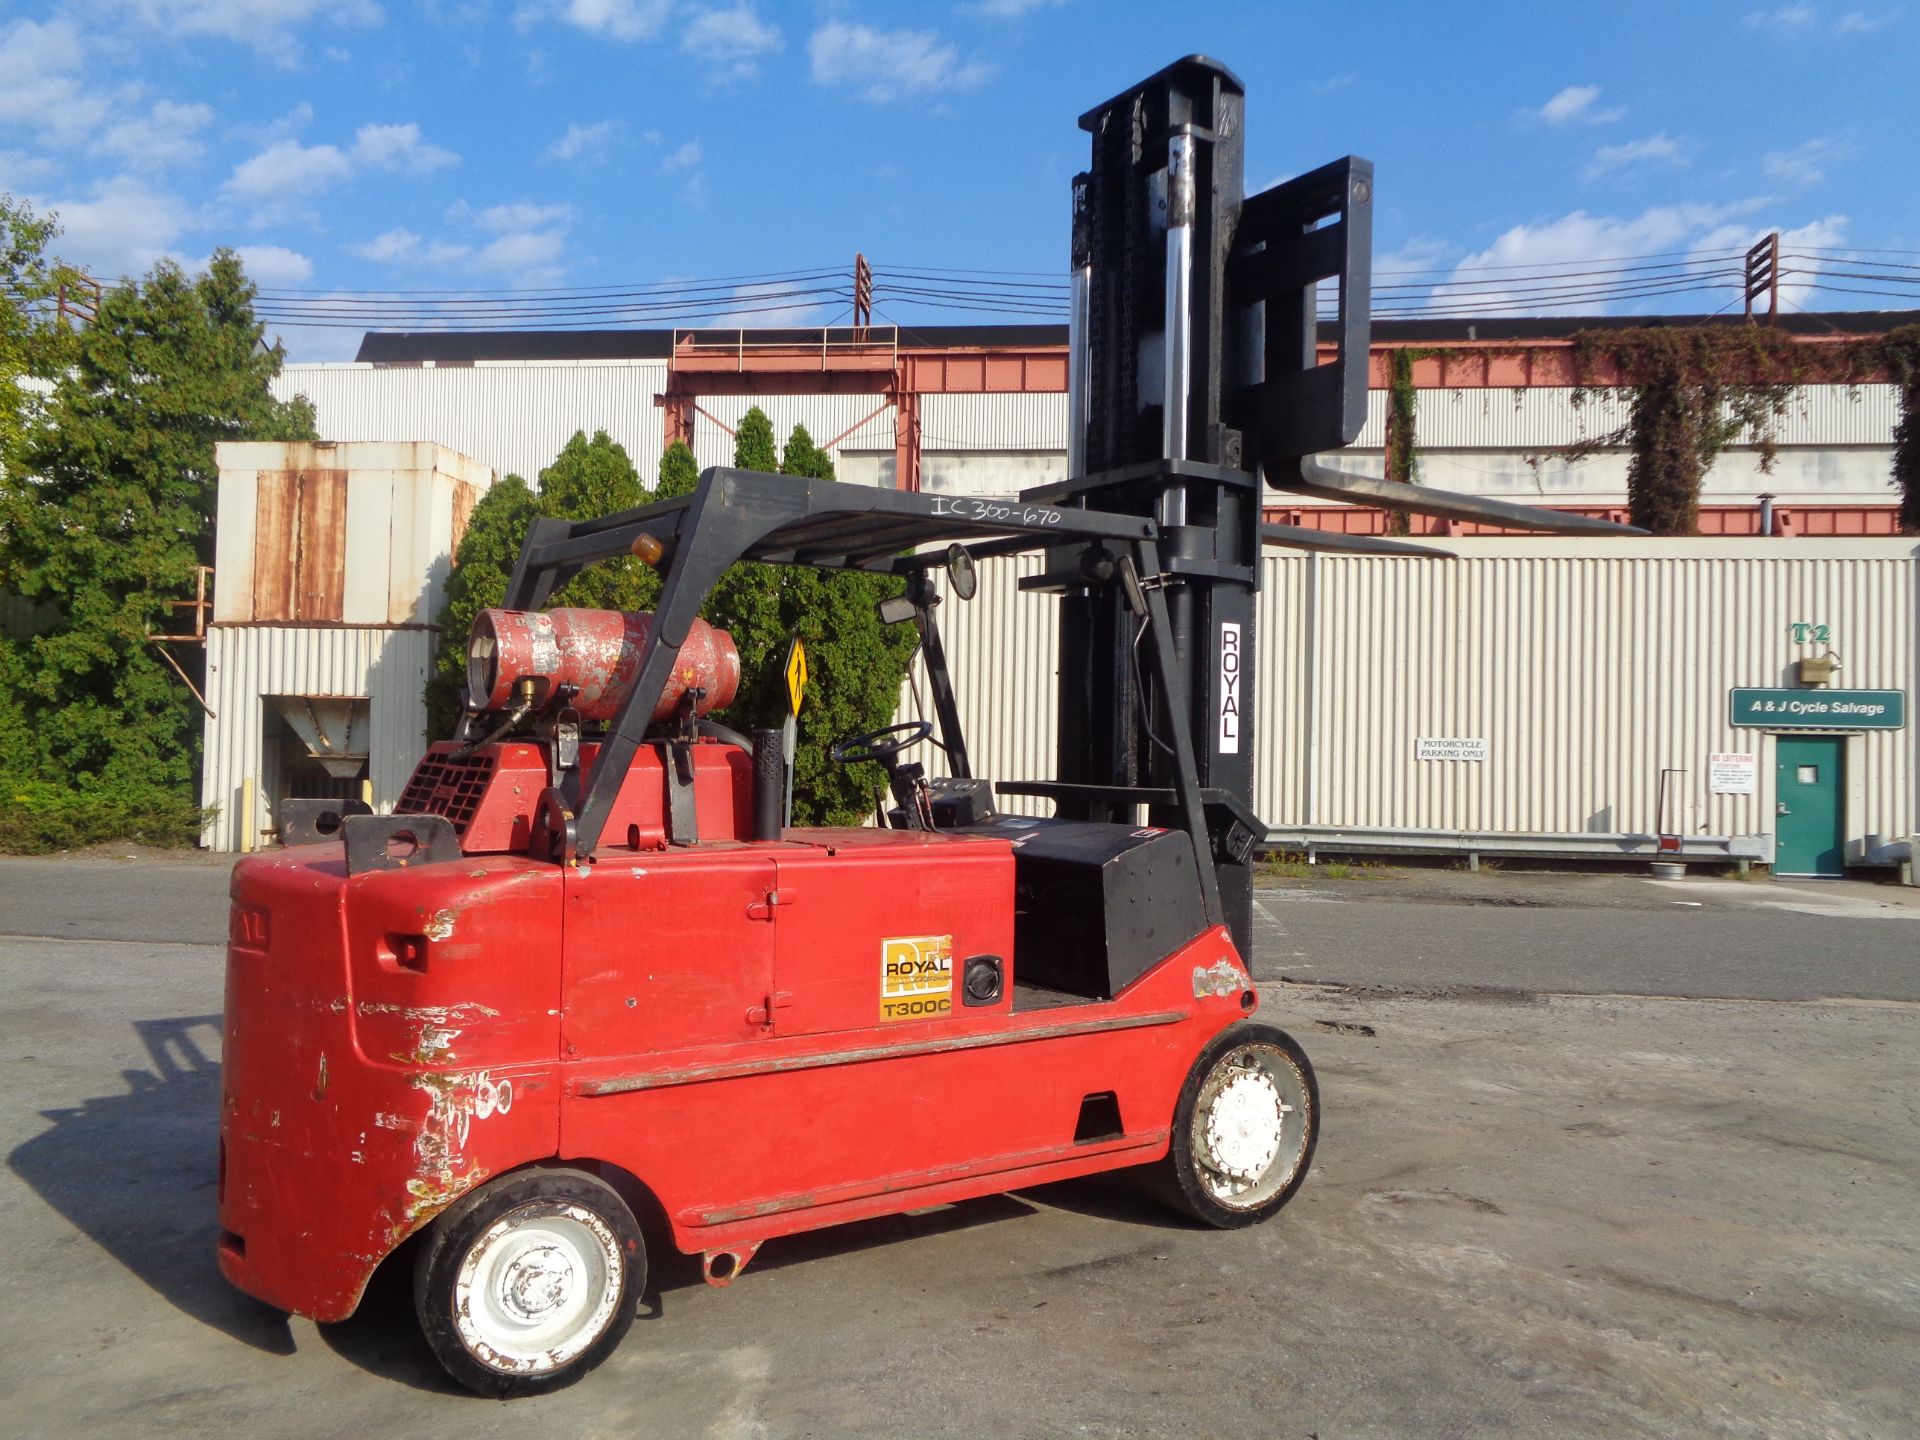 Royal T300C 30,000lbs Forklift - Image 5 of 19